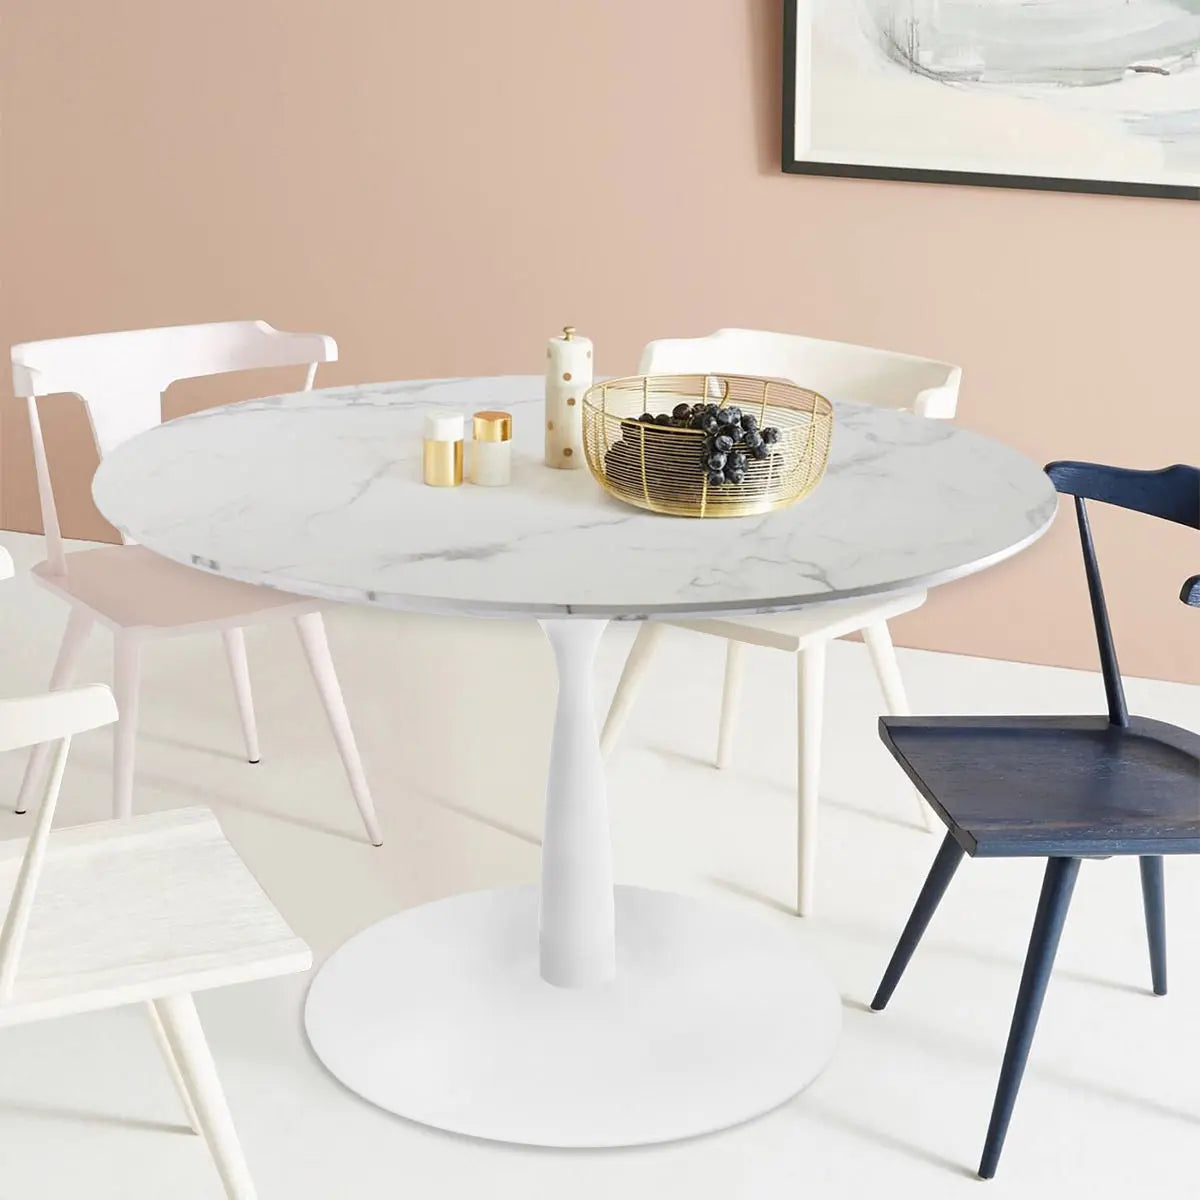 Harris 40" Faux Marble Round Dining Table The Pop Maison